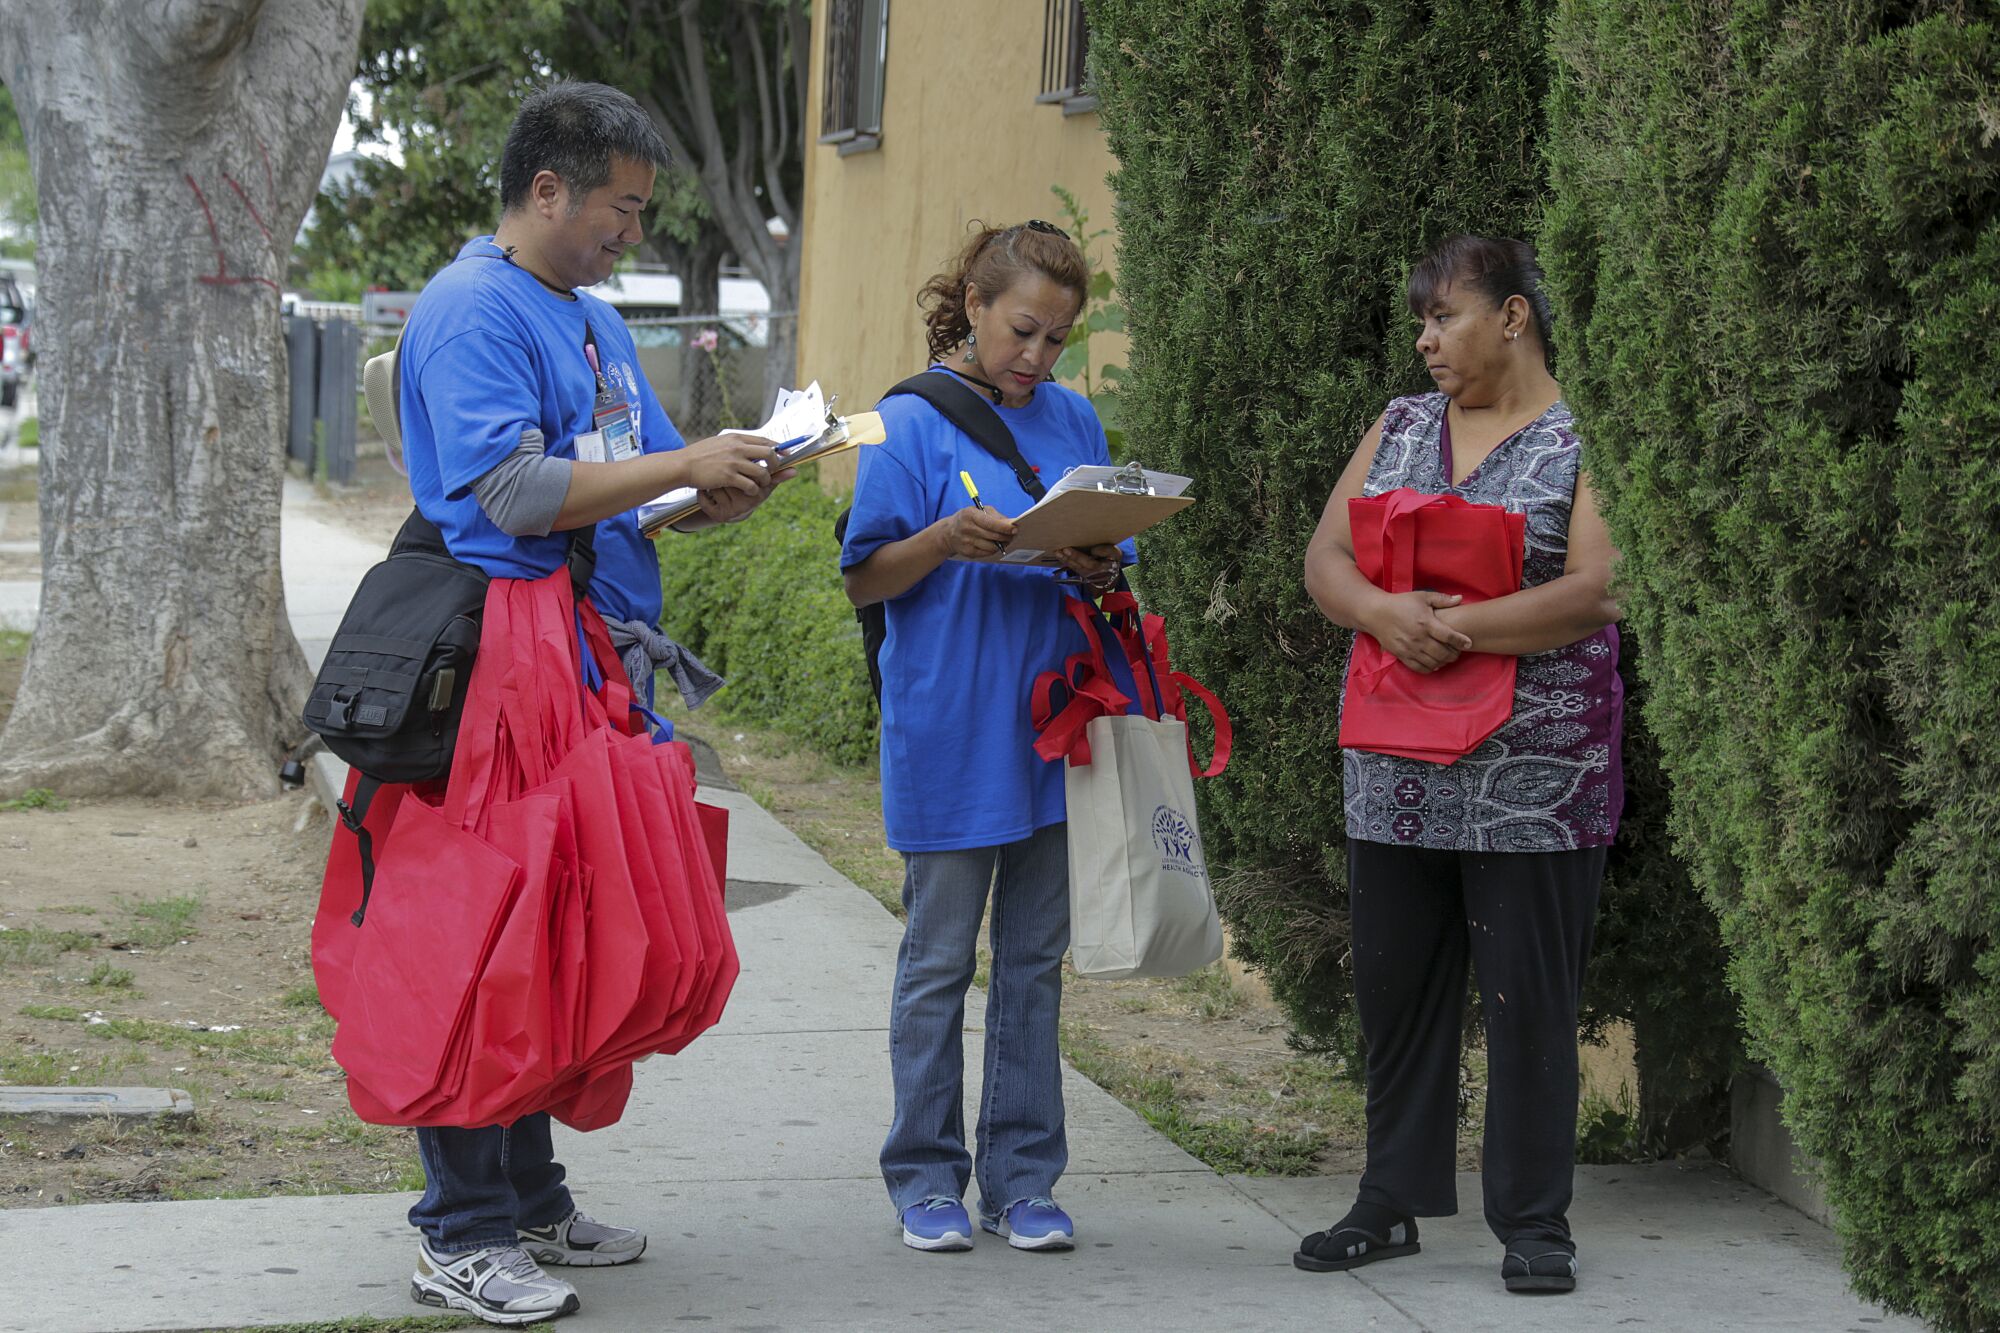 A man and woman carrying clipboards and red tote bags talk to a woman outside a residence.